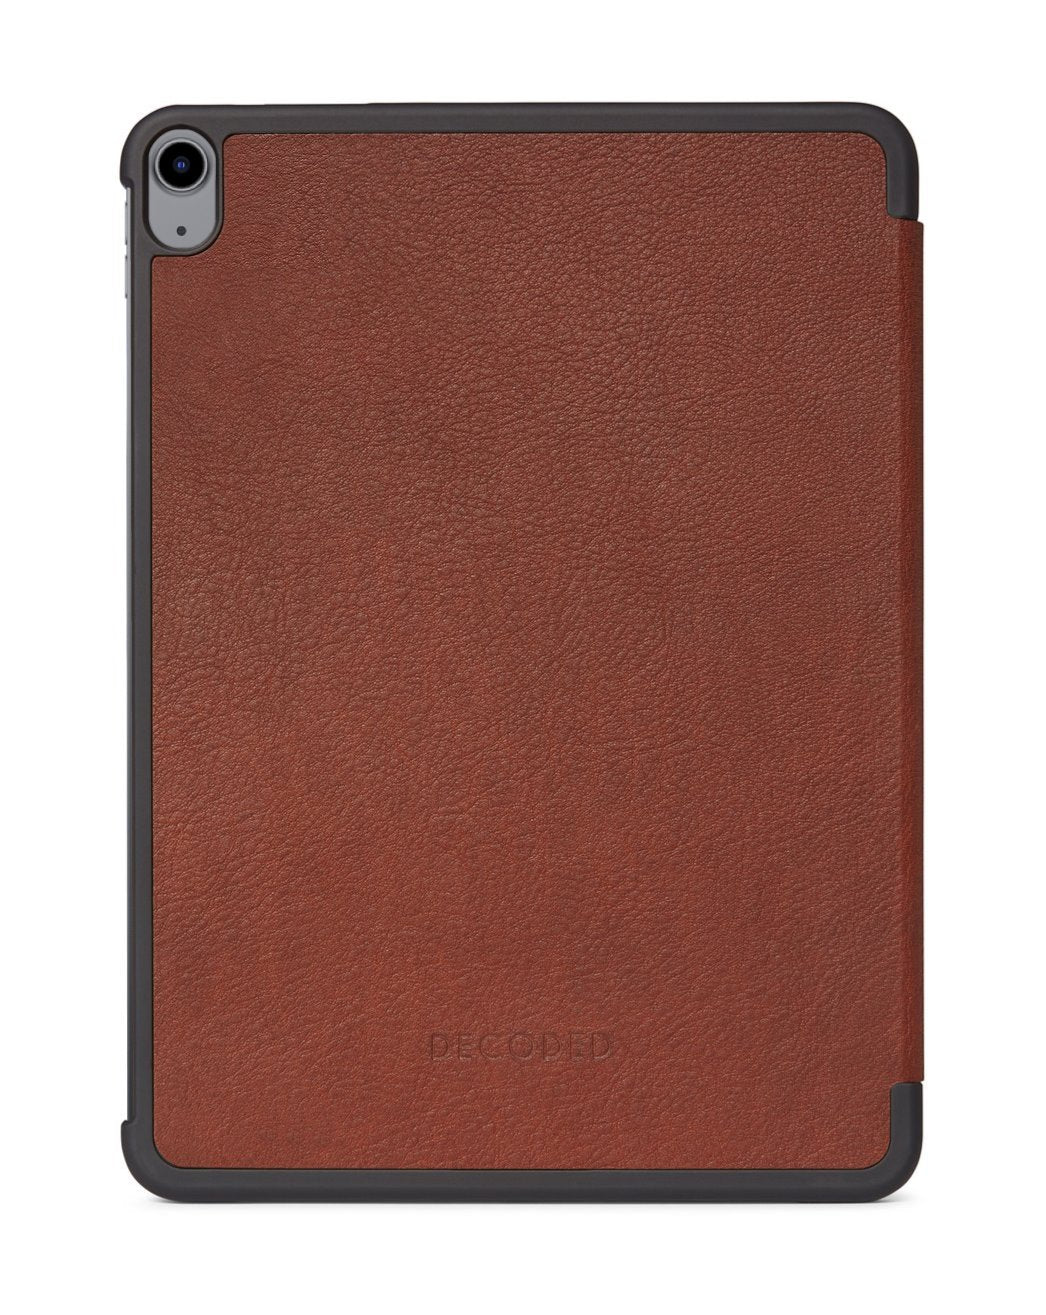 iPad Air 10.9 4th Gen (2020) Leather Hoesje Slim Cover bruin